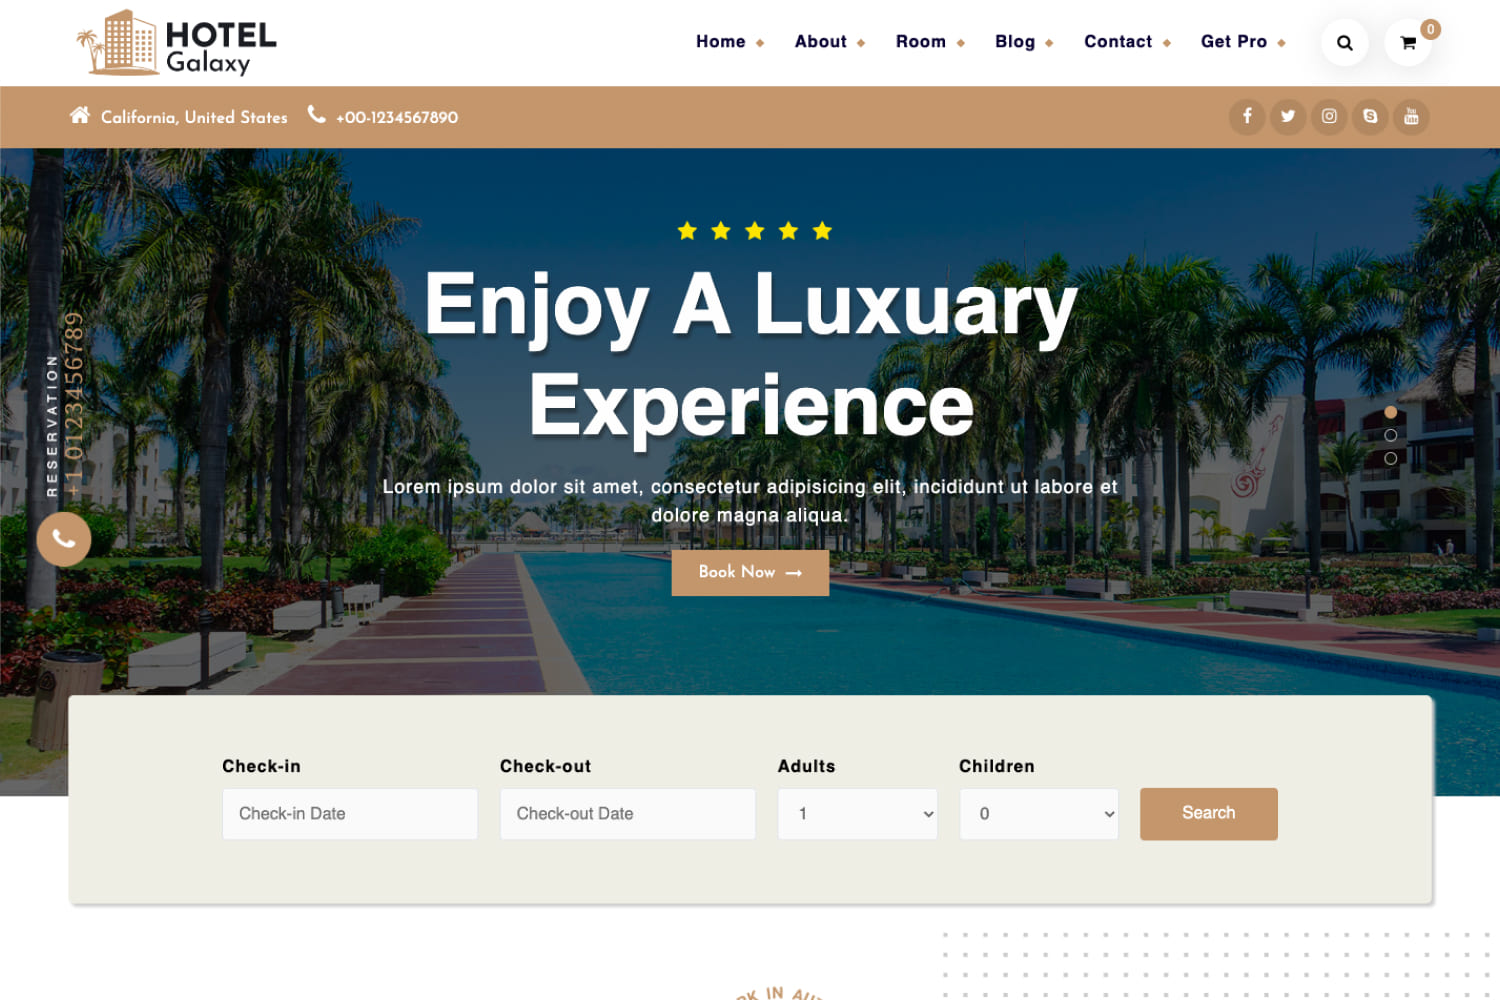 Home page of the hotel website with a photo of a large pool under palm trees and a booking block.